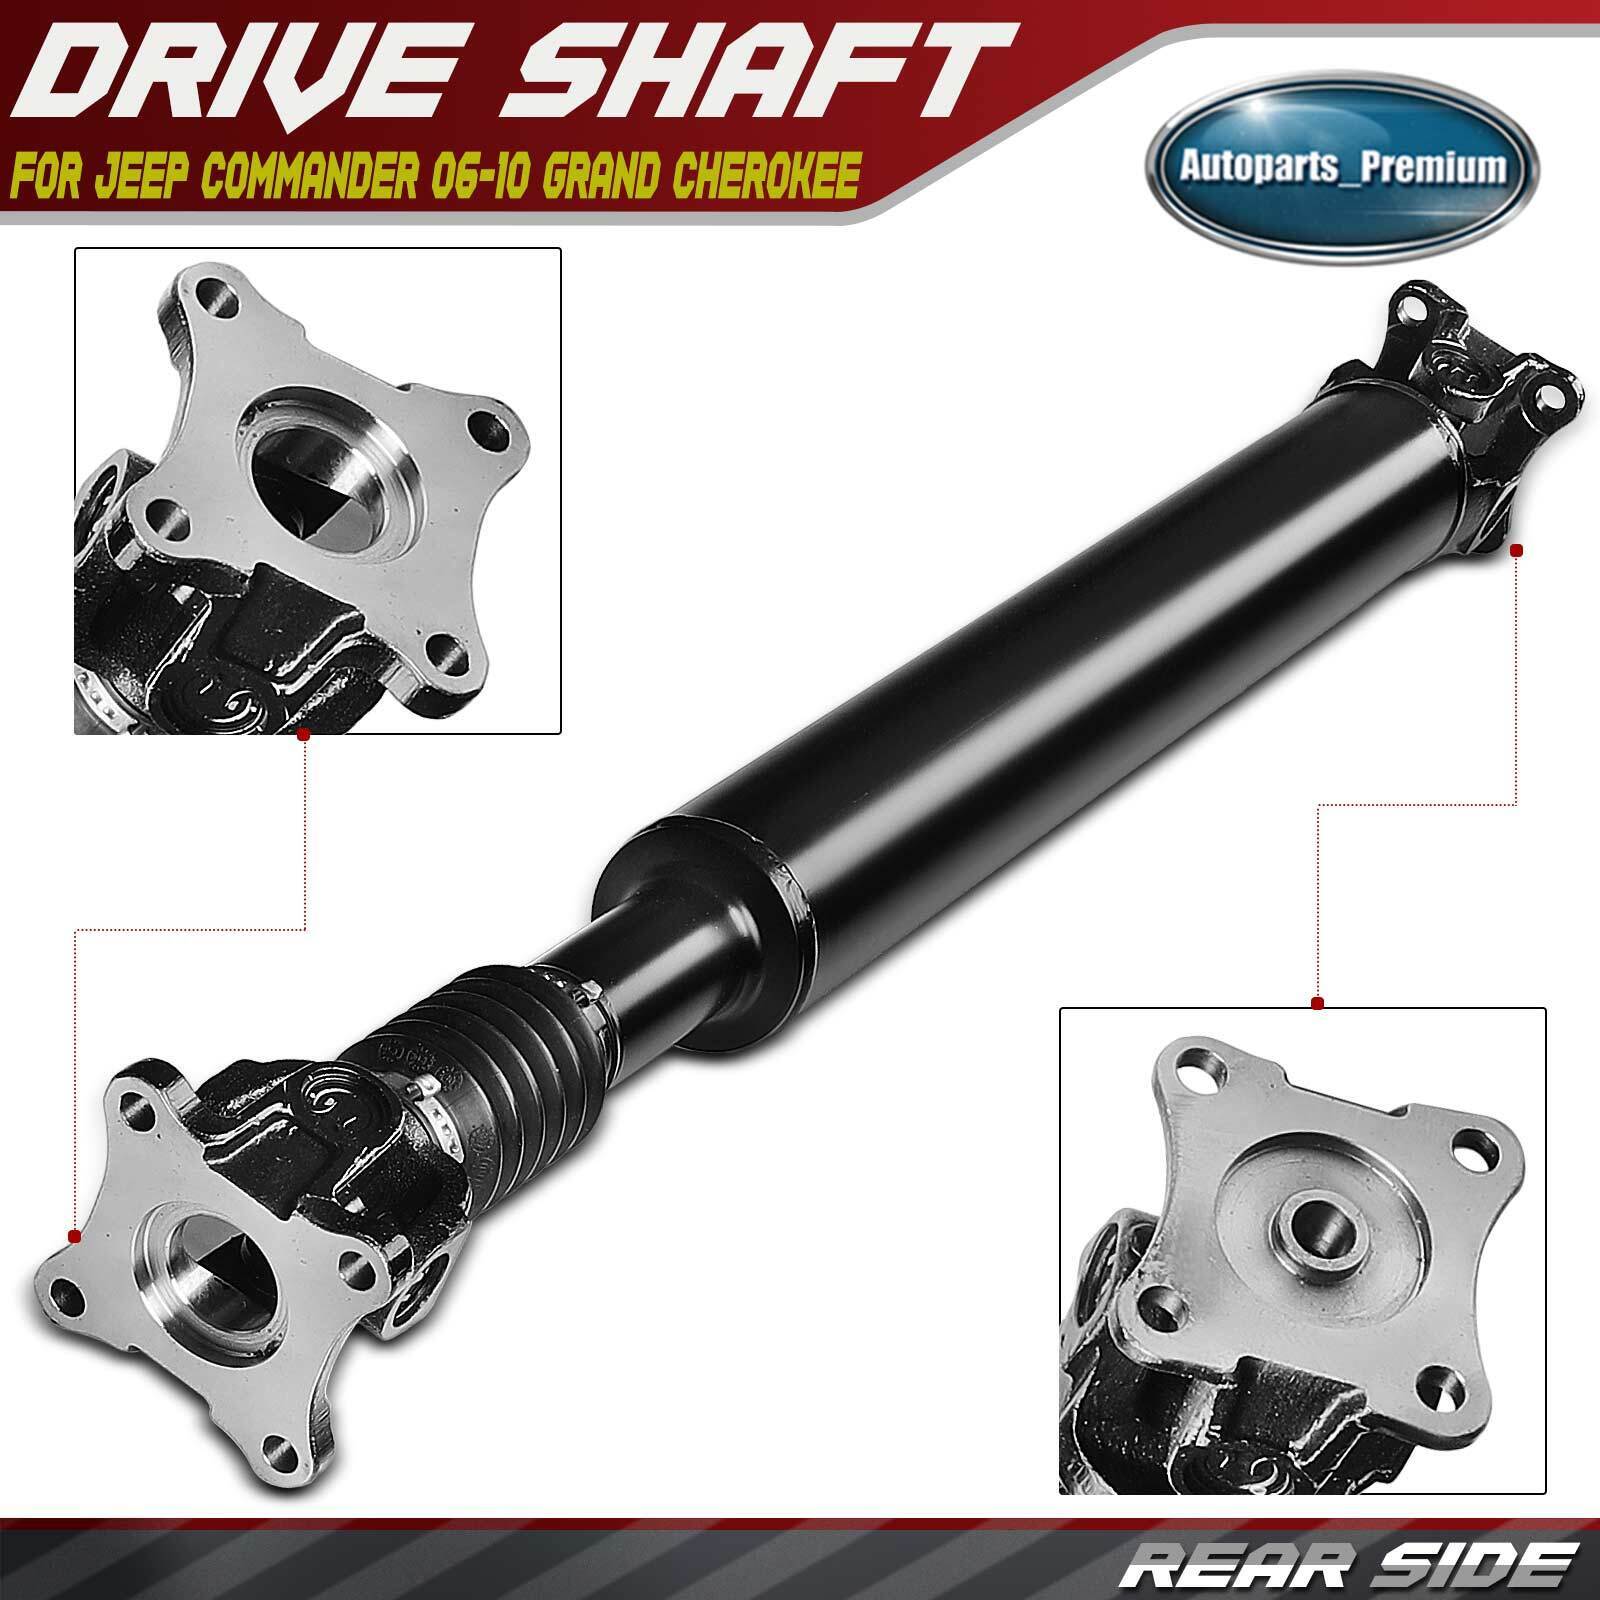 Rear Drive shaft Assembly for Jeep Grand Cherokee Commander Liberty Auto Tran